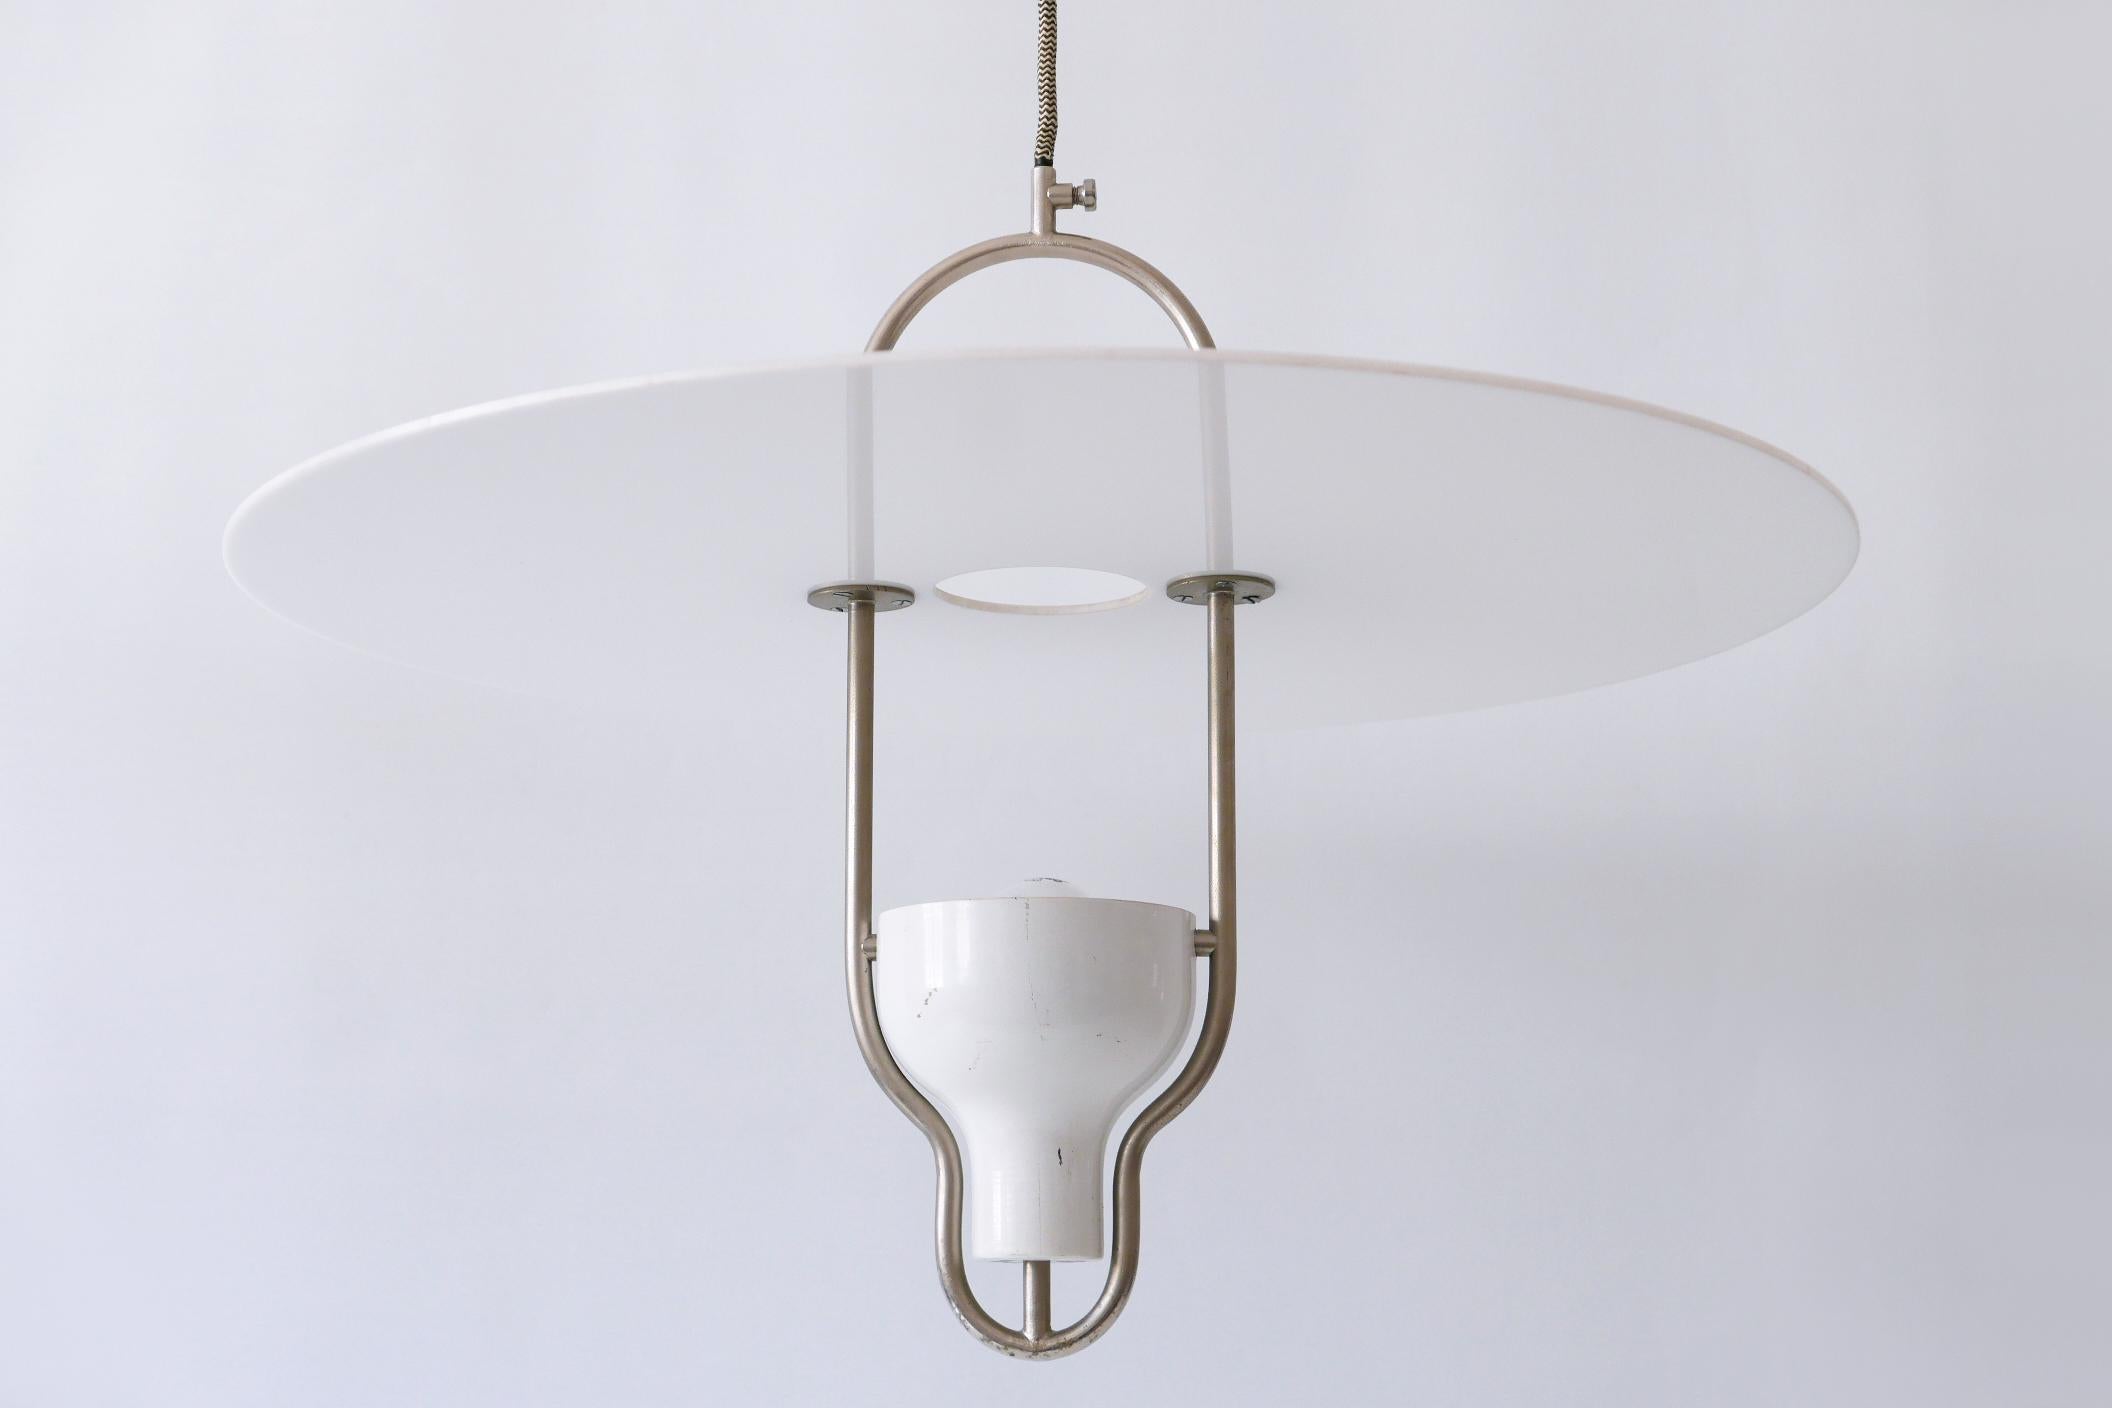 Exceptional Mid-Century Modern Ufo Pendant Lamp, Italy, 1960s For Sale 10